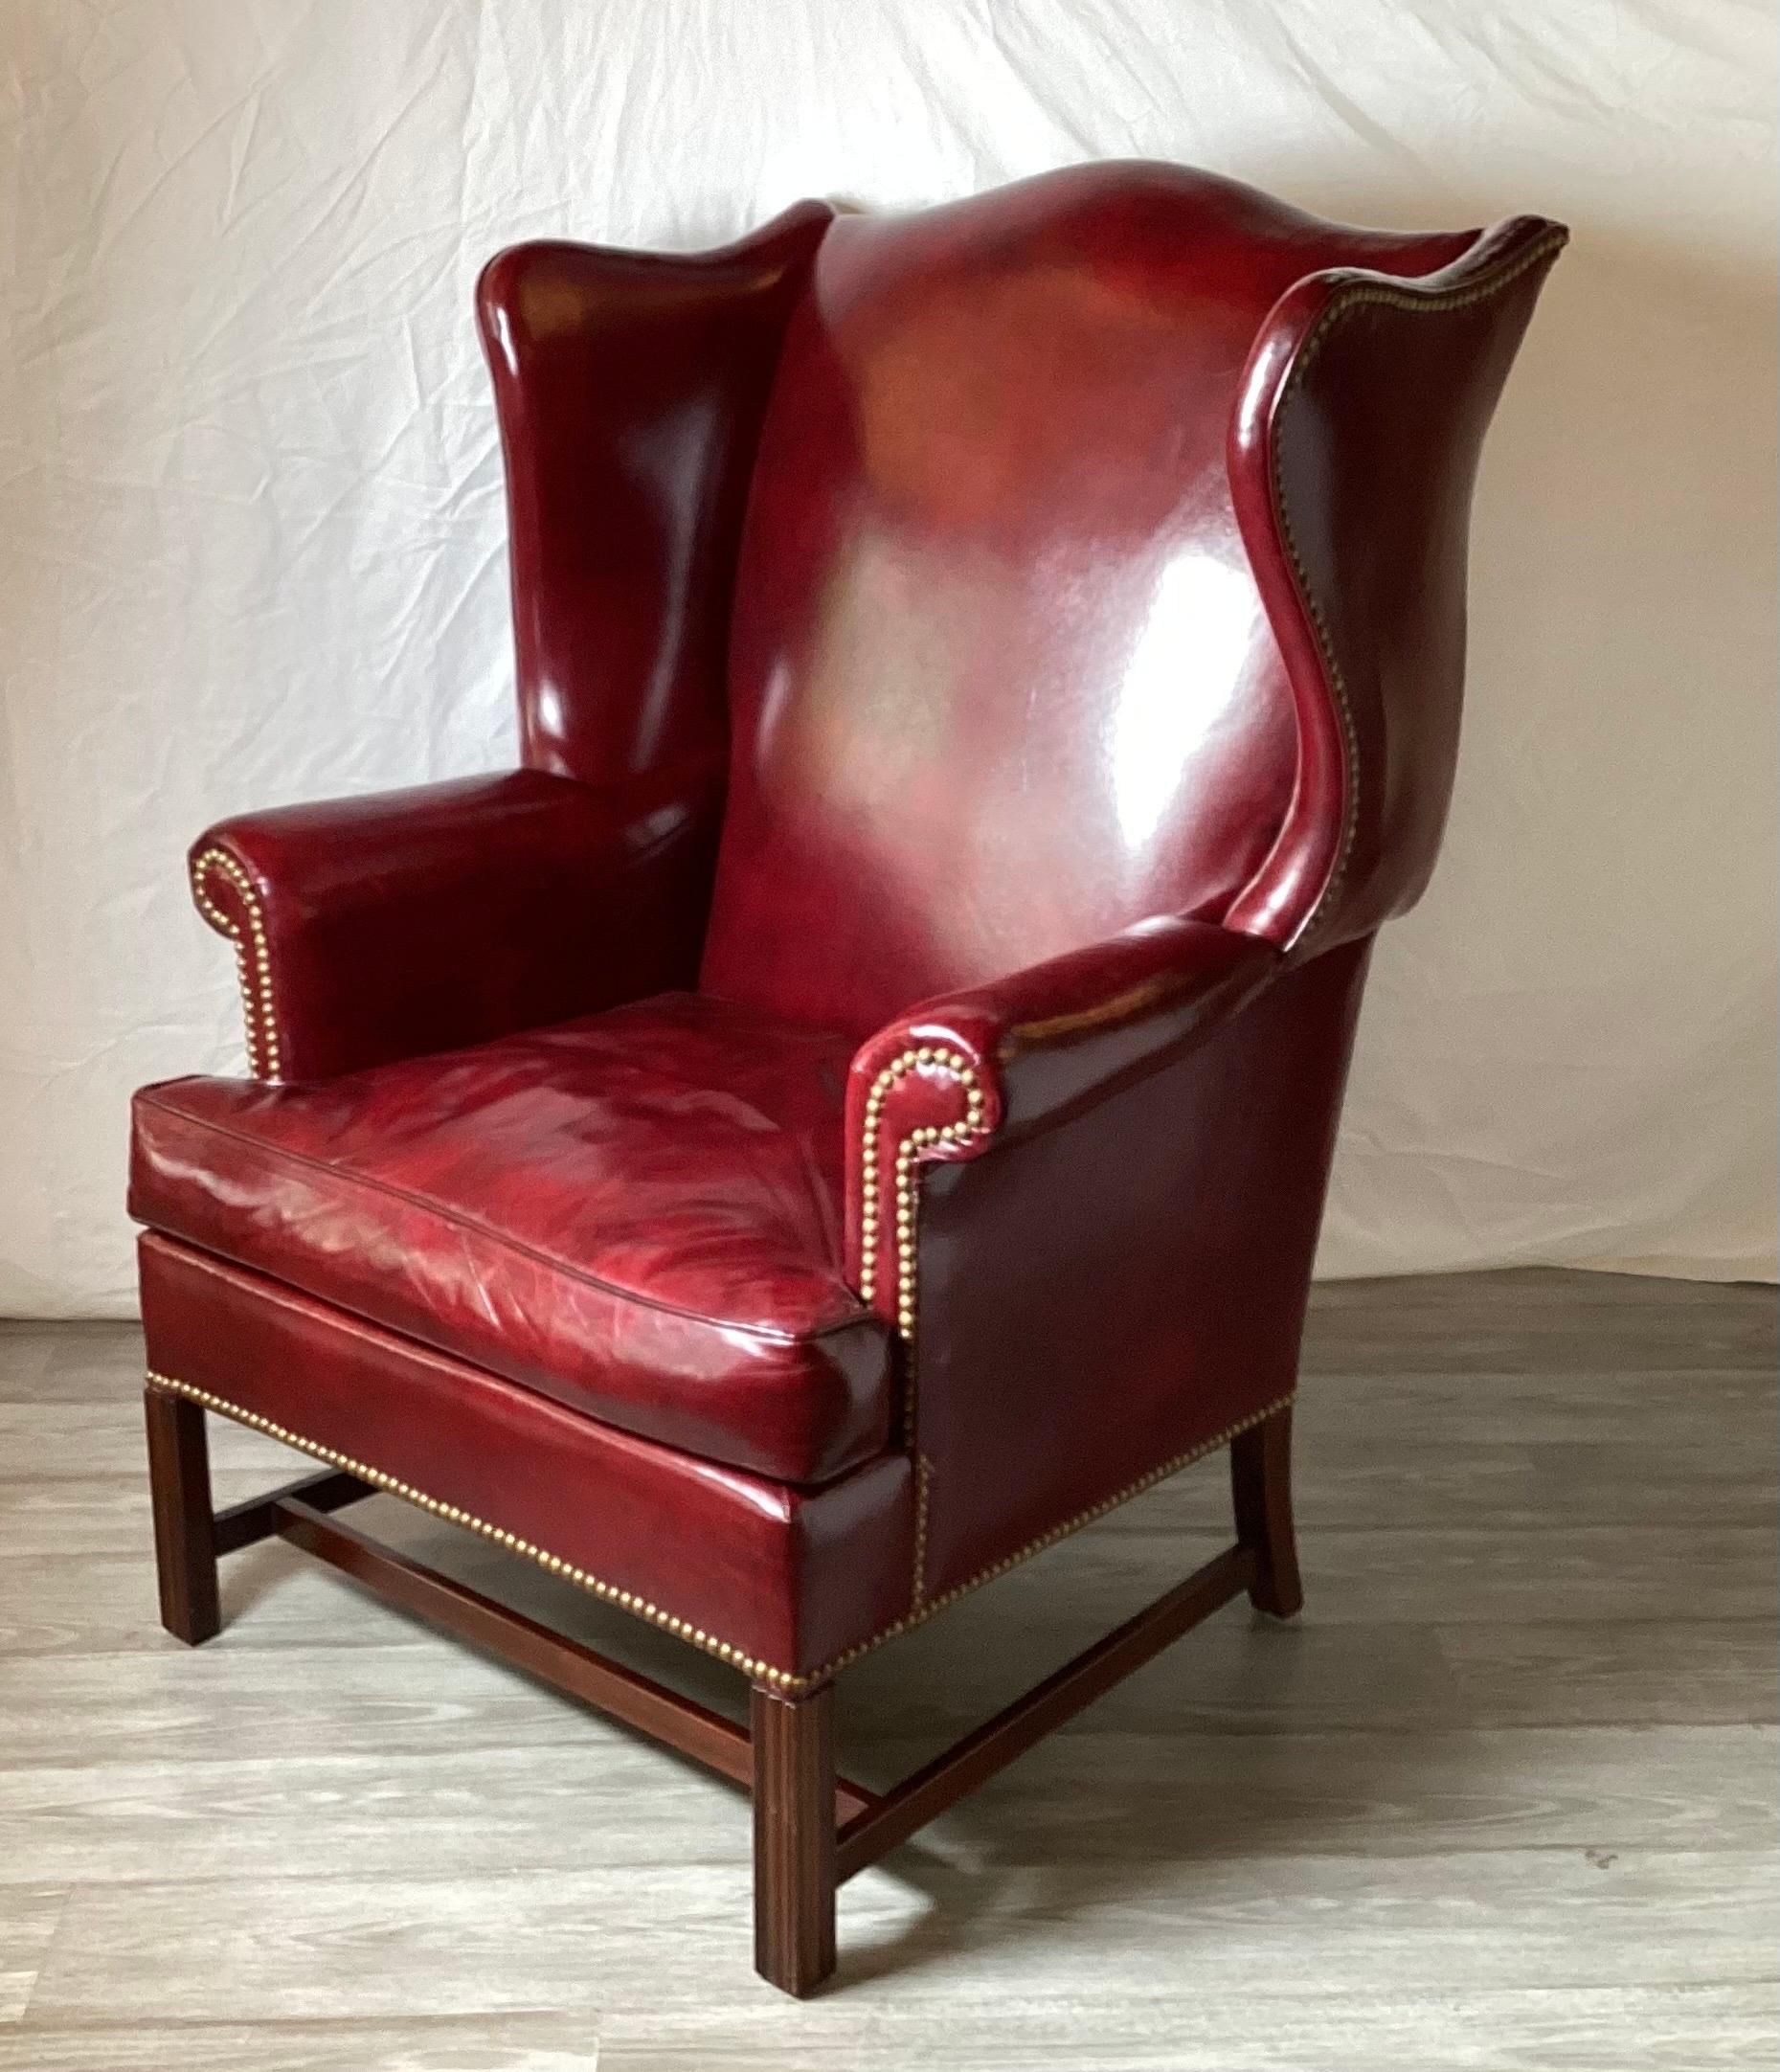 American Pair of Cordovan Leather Devon Wing Chairs by Hickory Chair